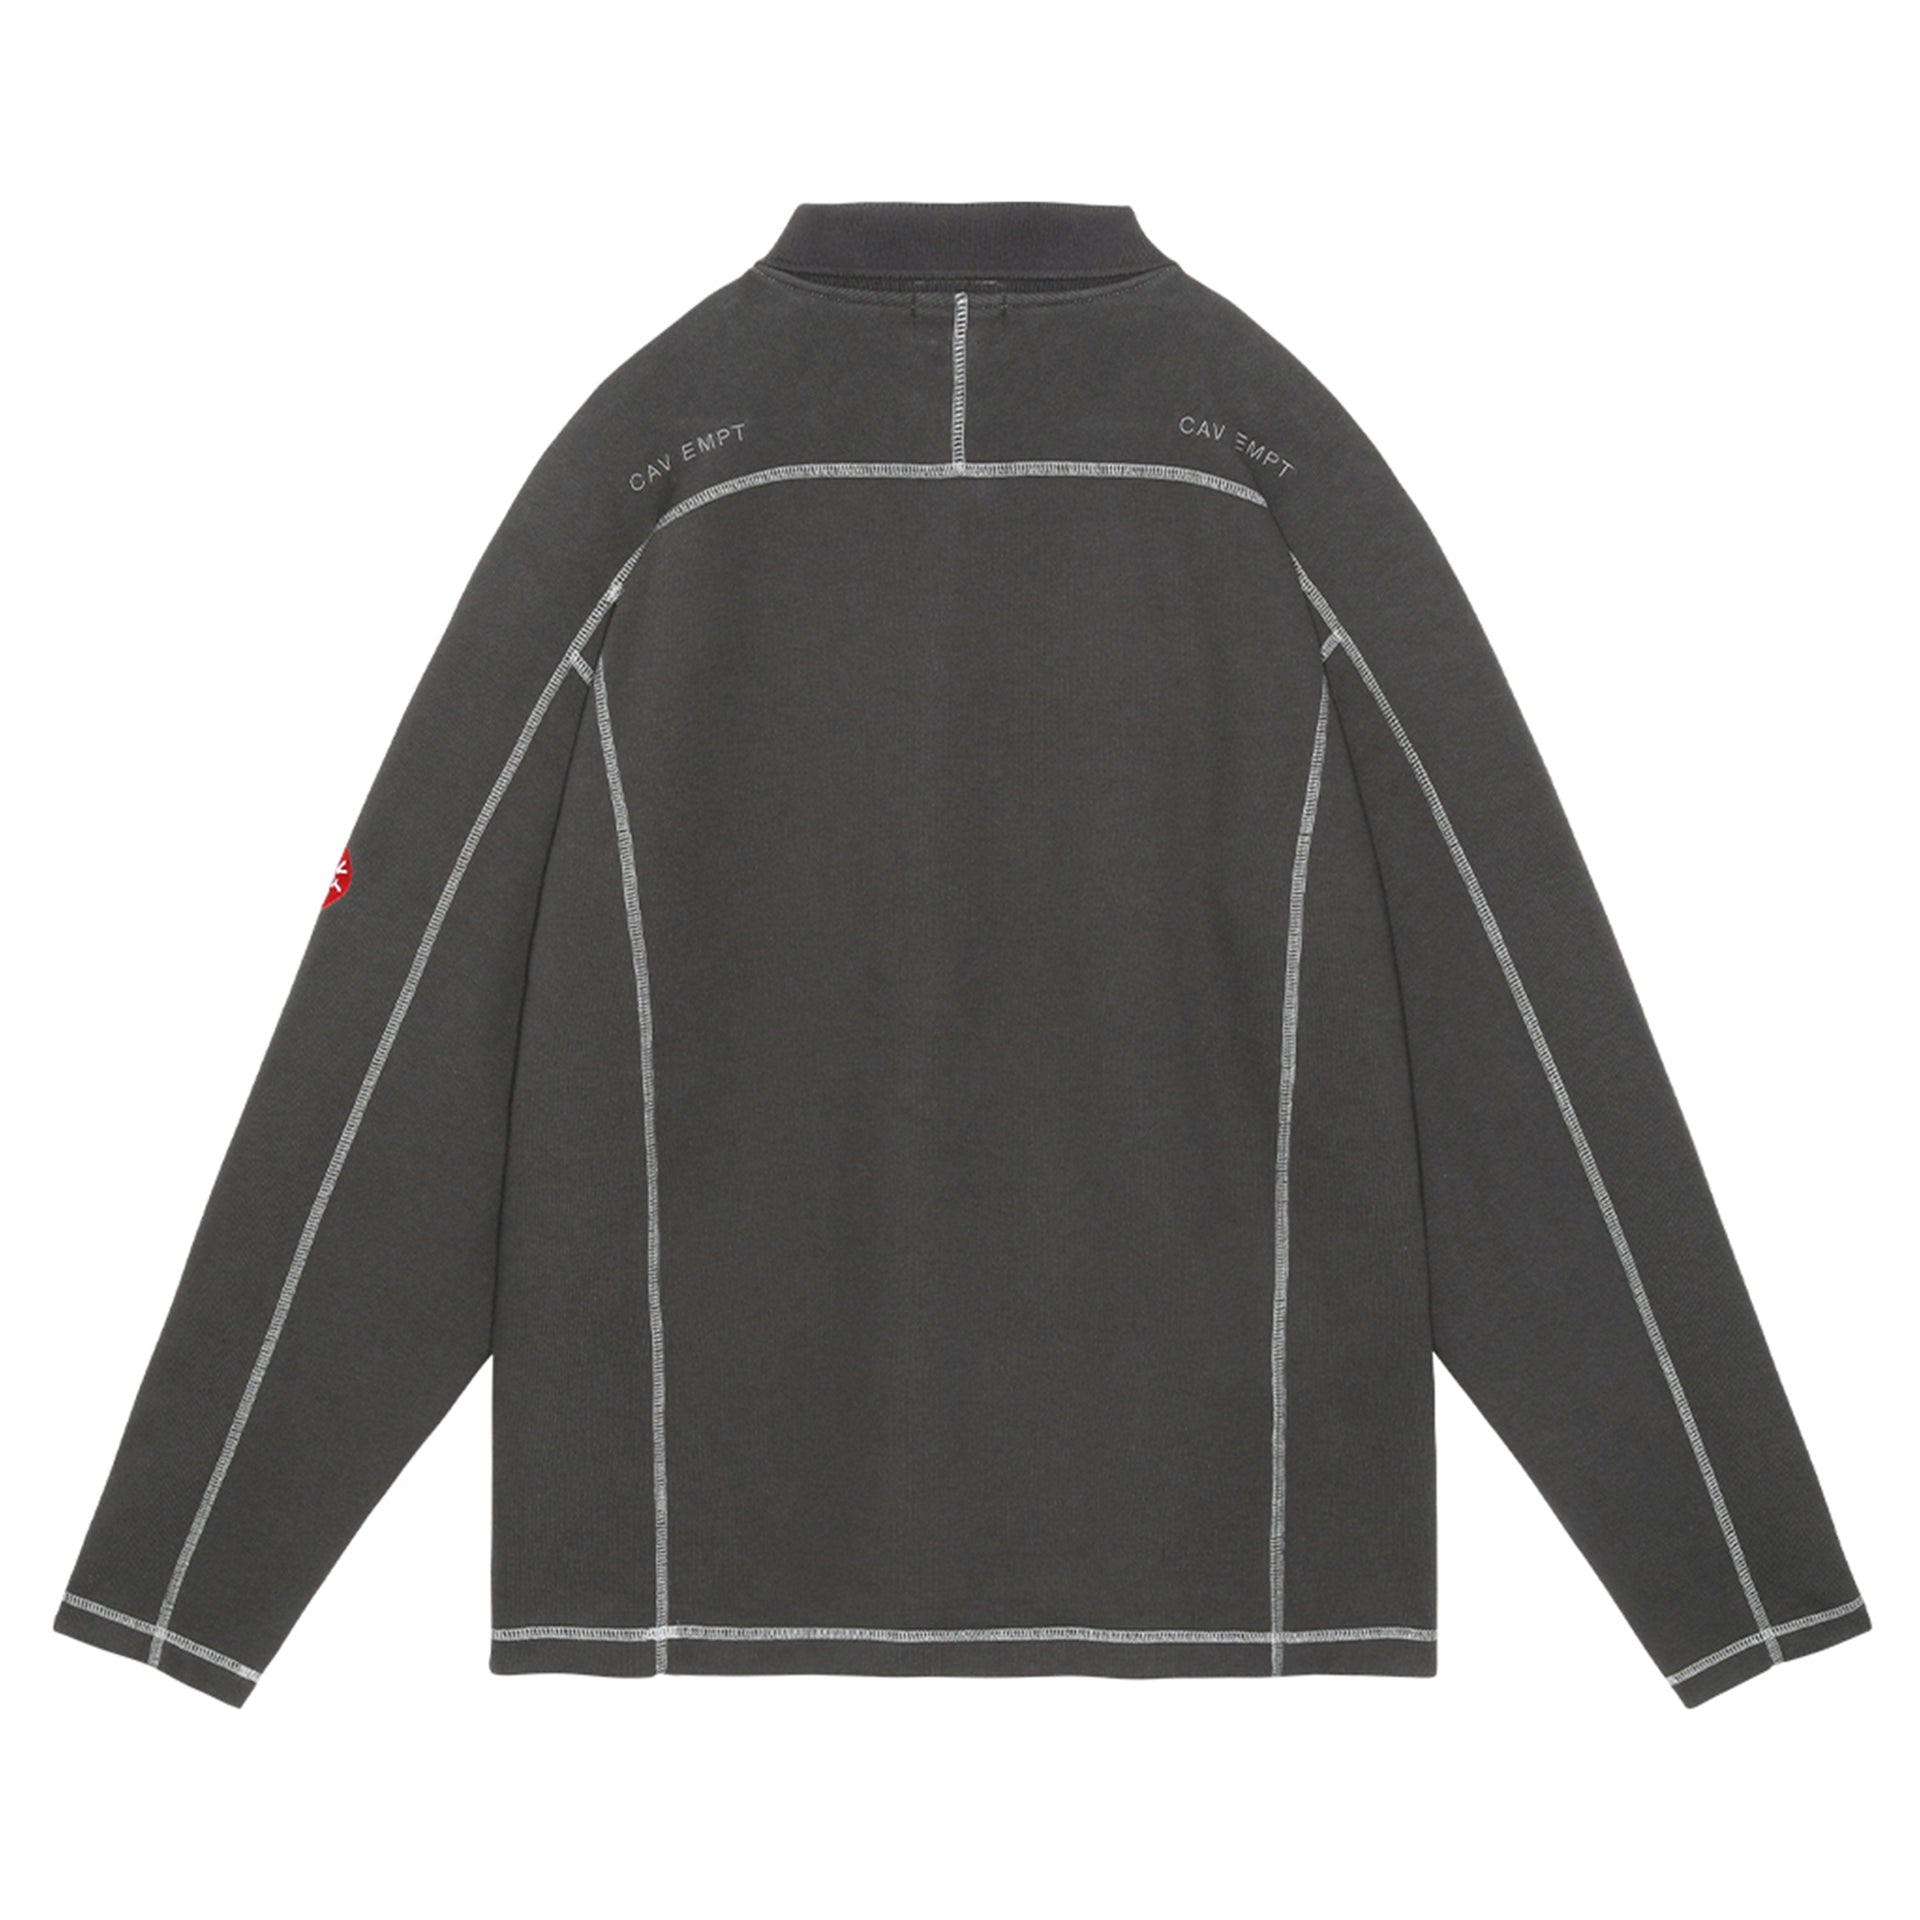 DBL KNIT LONG SLEEVE POLO / CHARCOAL